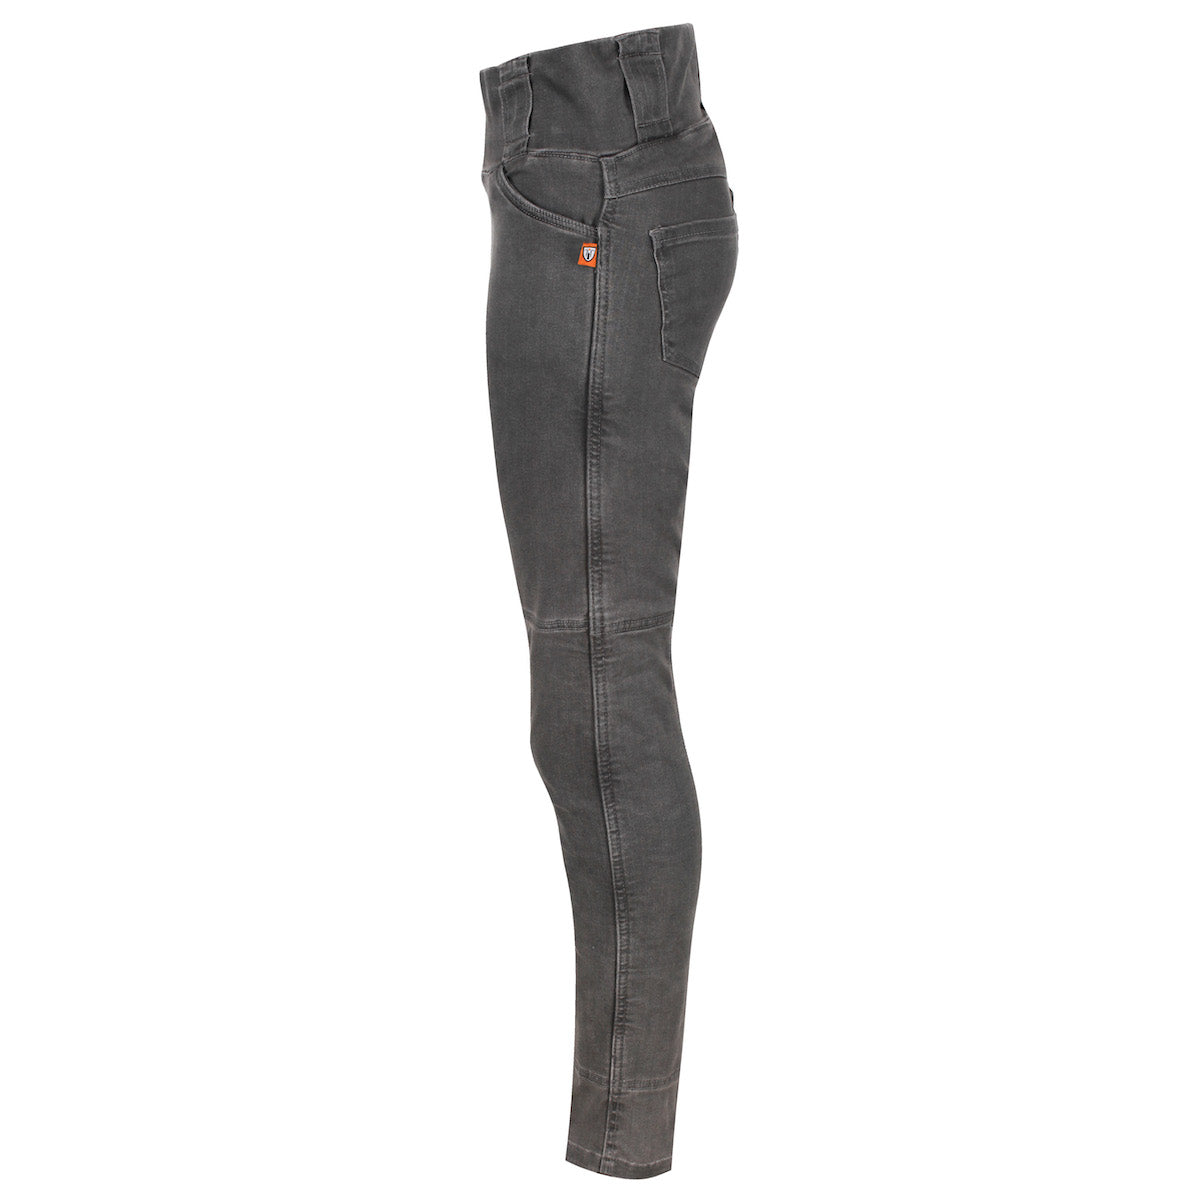 Grey MotoGirl female motorcycle jeggings with high waste from the side